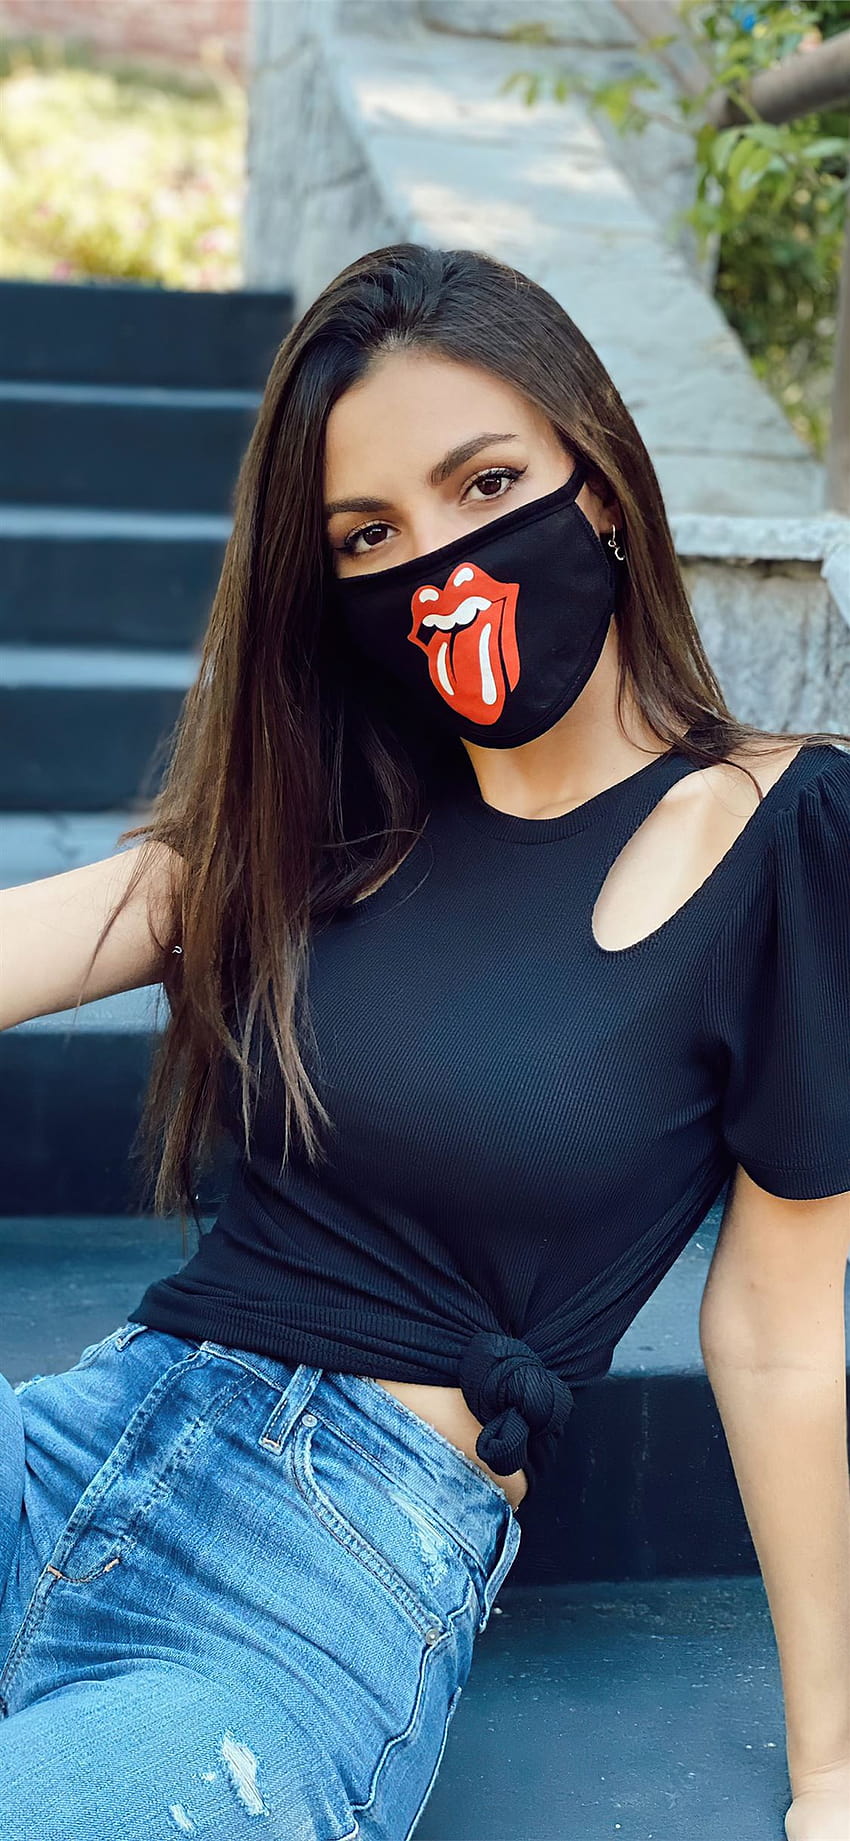 victoria justice mask iPhone X, girl in mask HD phone wallpaper